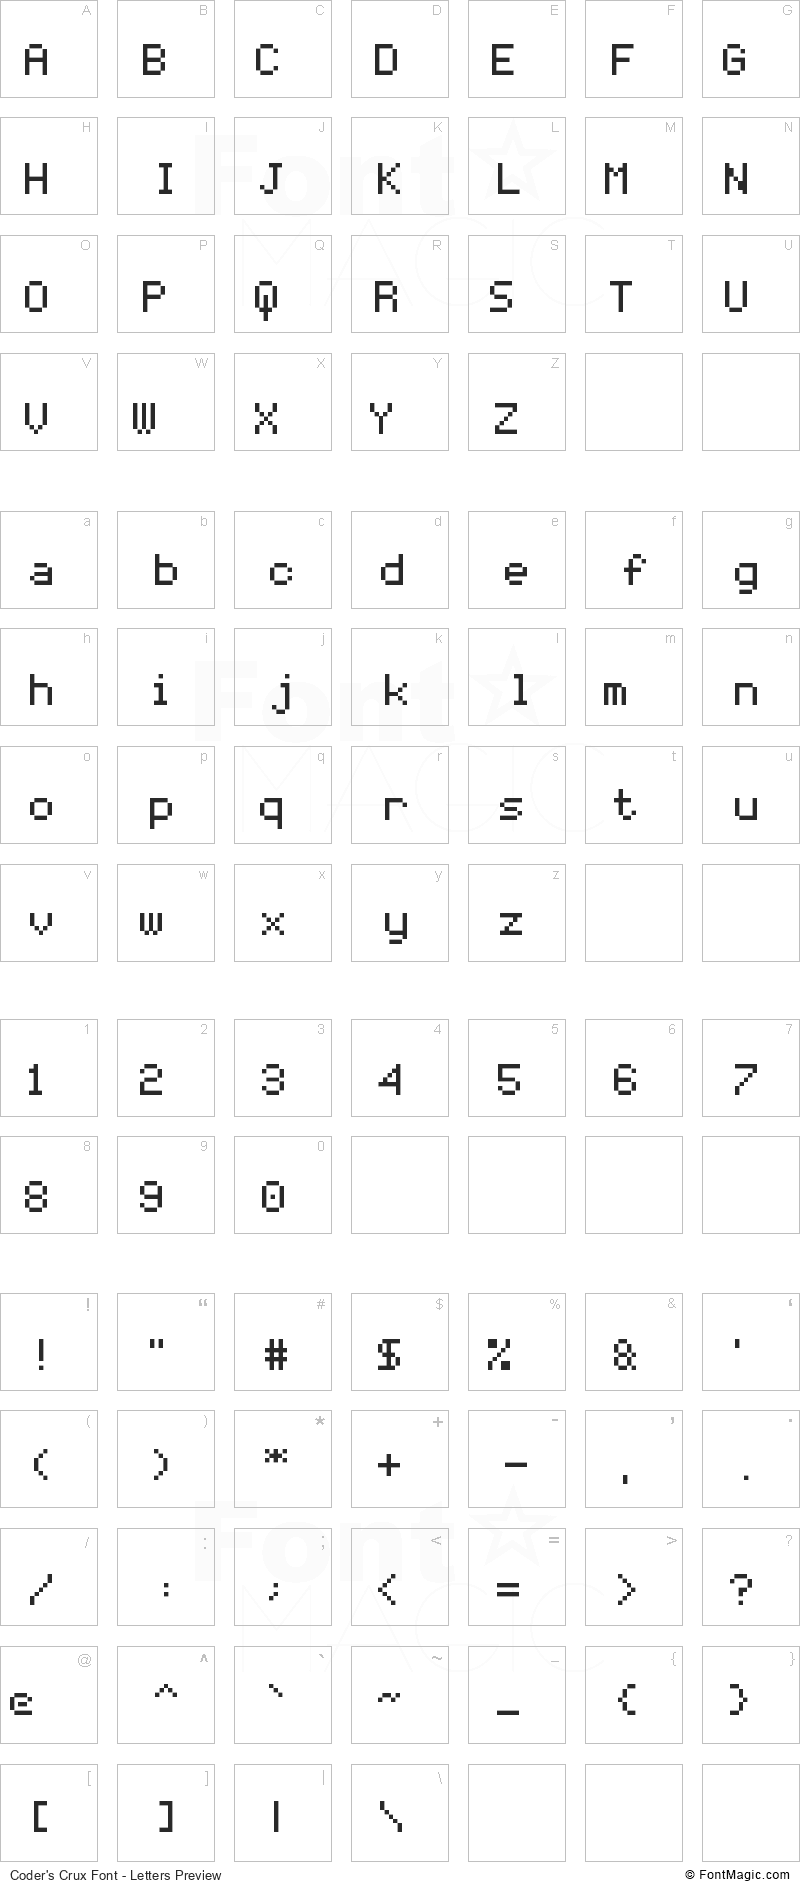 Coder’s Crux Font - All Latters Preview Chart